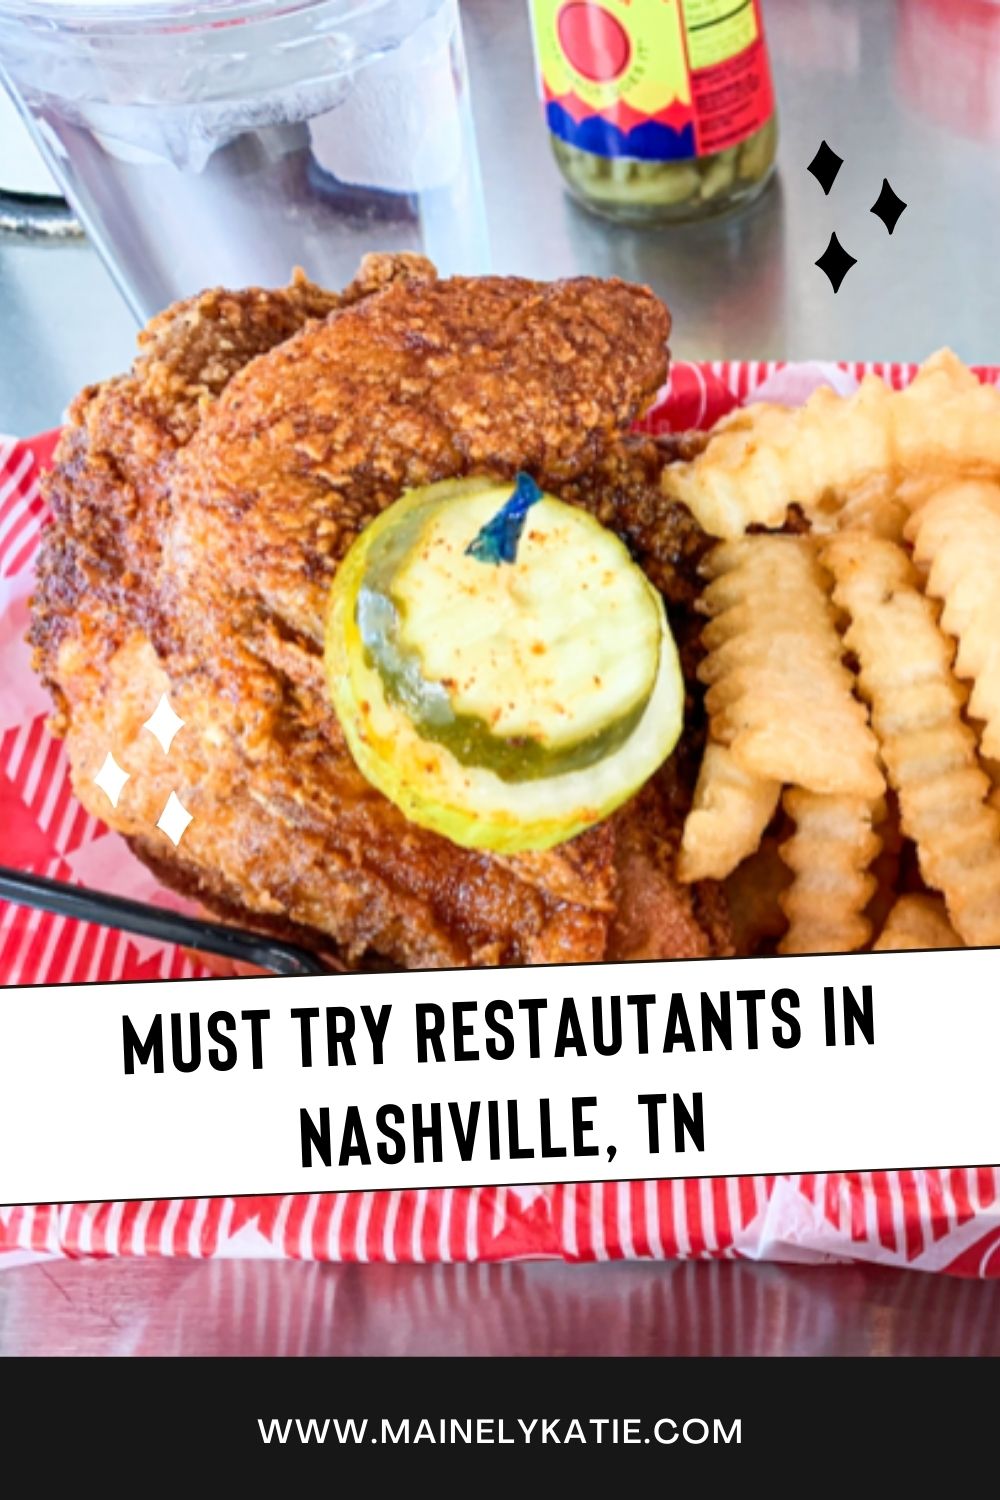 Nashville is one of my favorite cities to visit and we make it a point to go at least once a year. Nashville has everything from high end restaurants to dive bars and everything in between. There are so many great places to eat in Nashville, but every time we go we find ourselves going back to some of our favorites. I've put together a list of some must try restaurants in Nashville, TN. Some may be a bit touristy, but I feel like this list will give you the full Nashville experience.